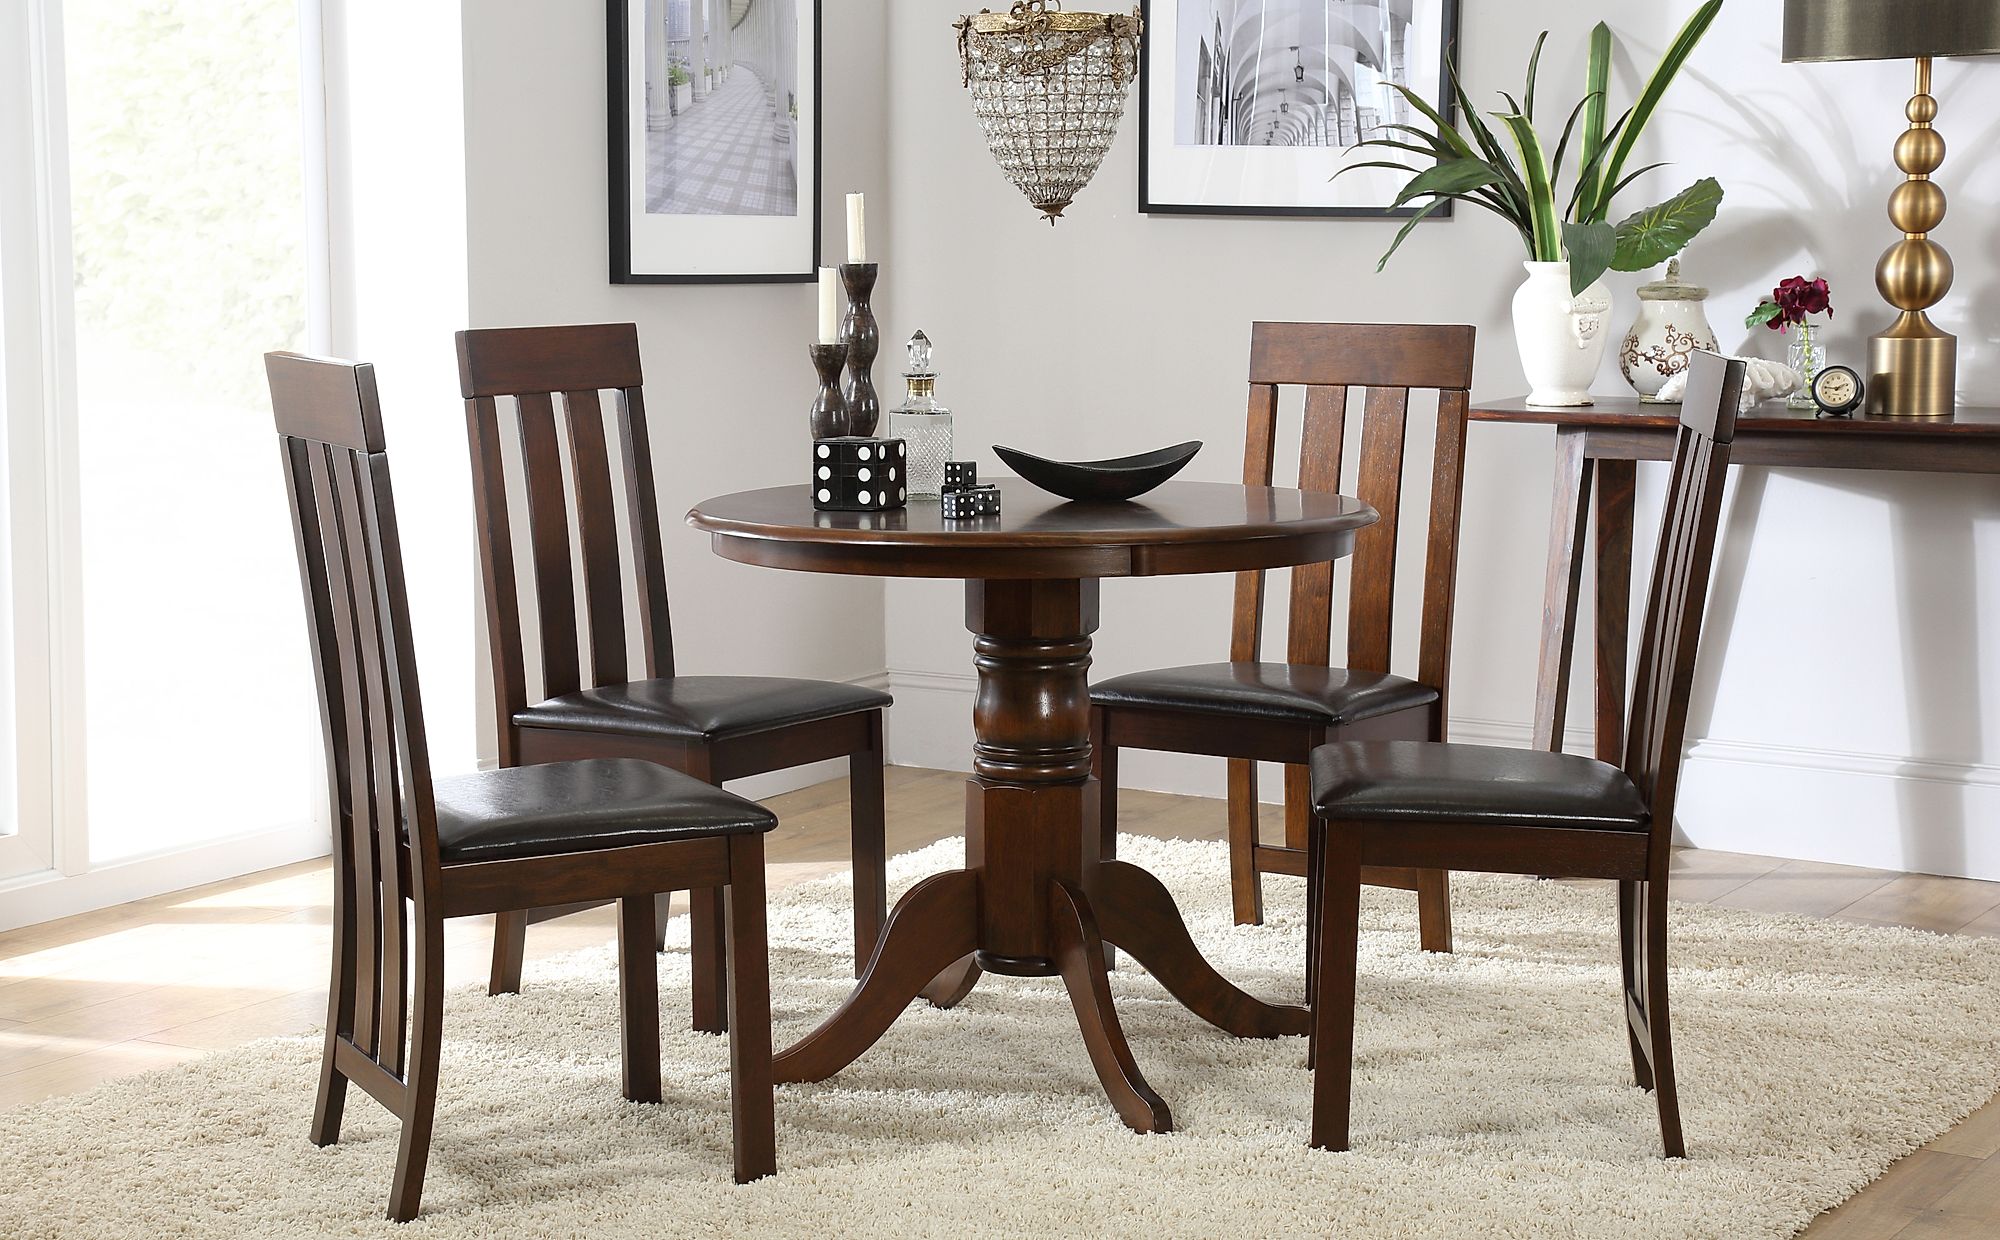 Kingston Round Dark Wood Dining Table With 4 Chester Chairs Brown